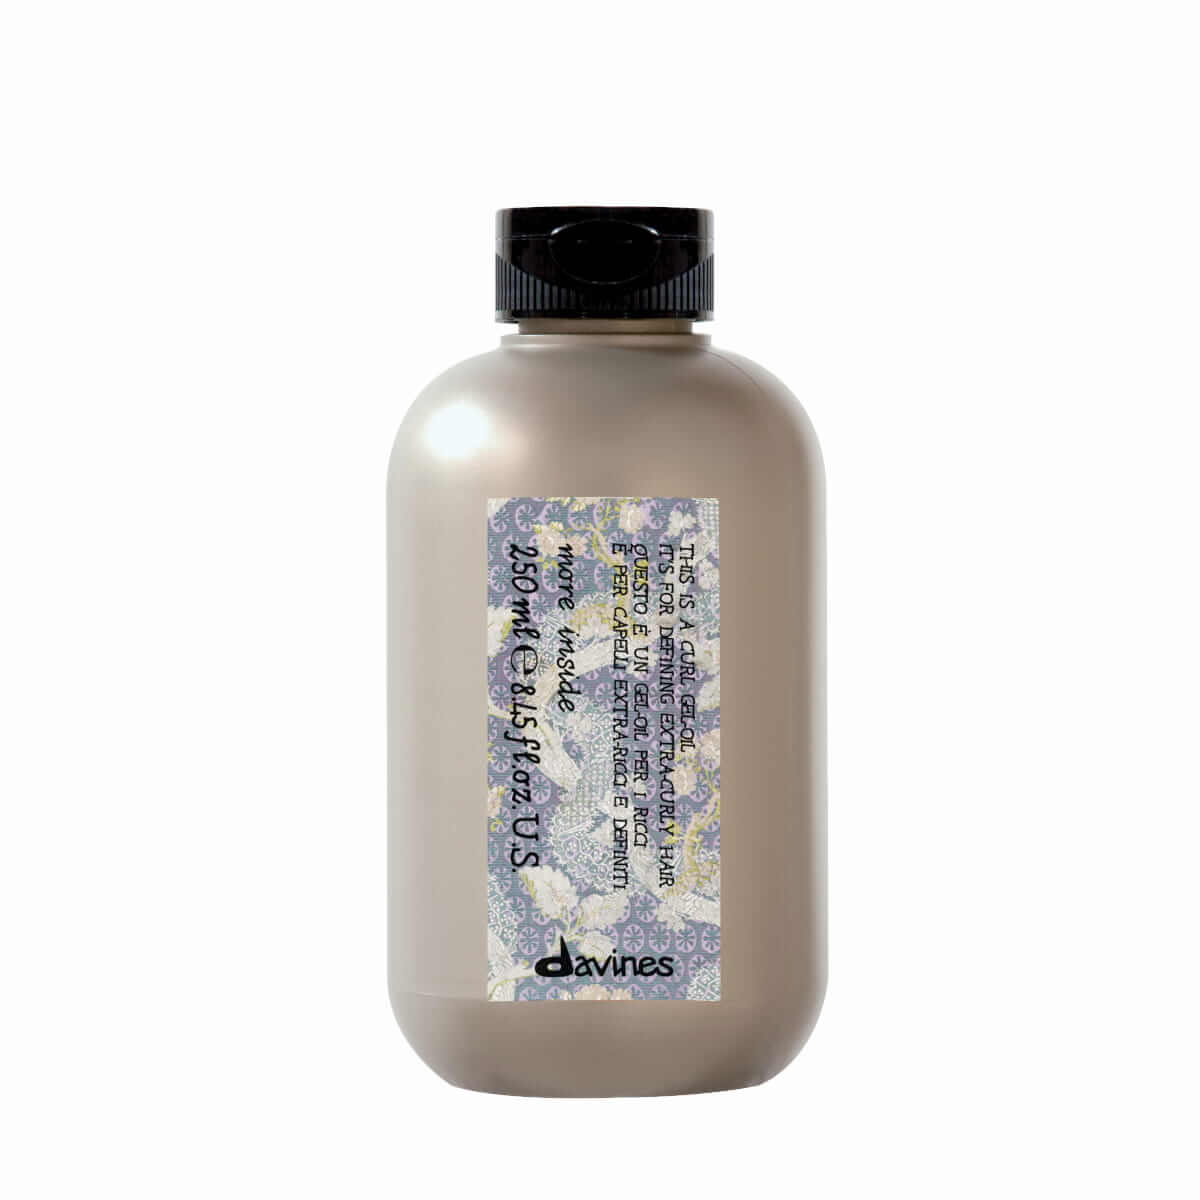 Davines Curl Gel Oil 250ml | FREE Delivery | North Laine Hair Co Brighton